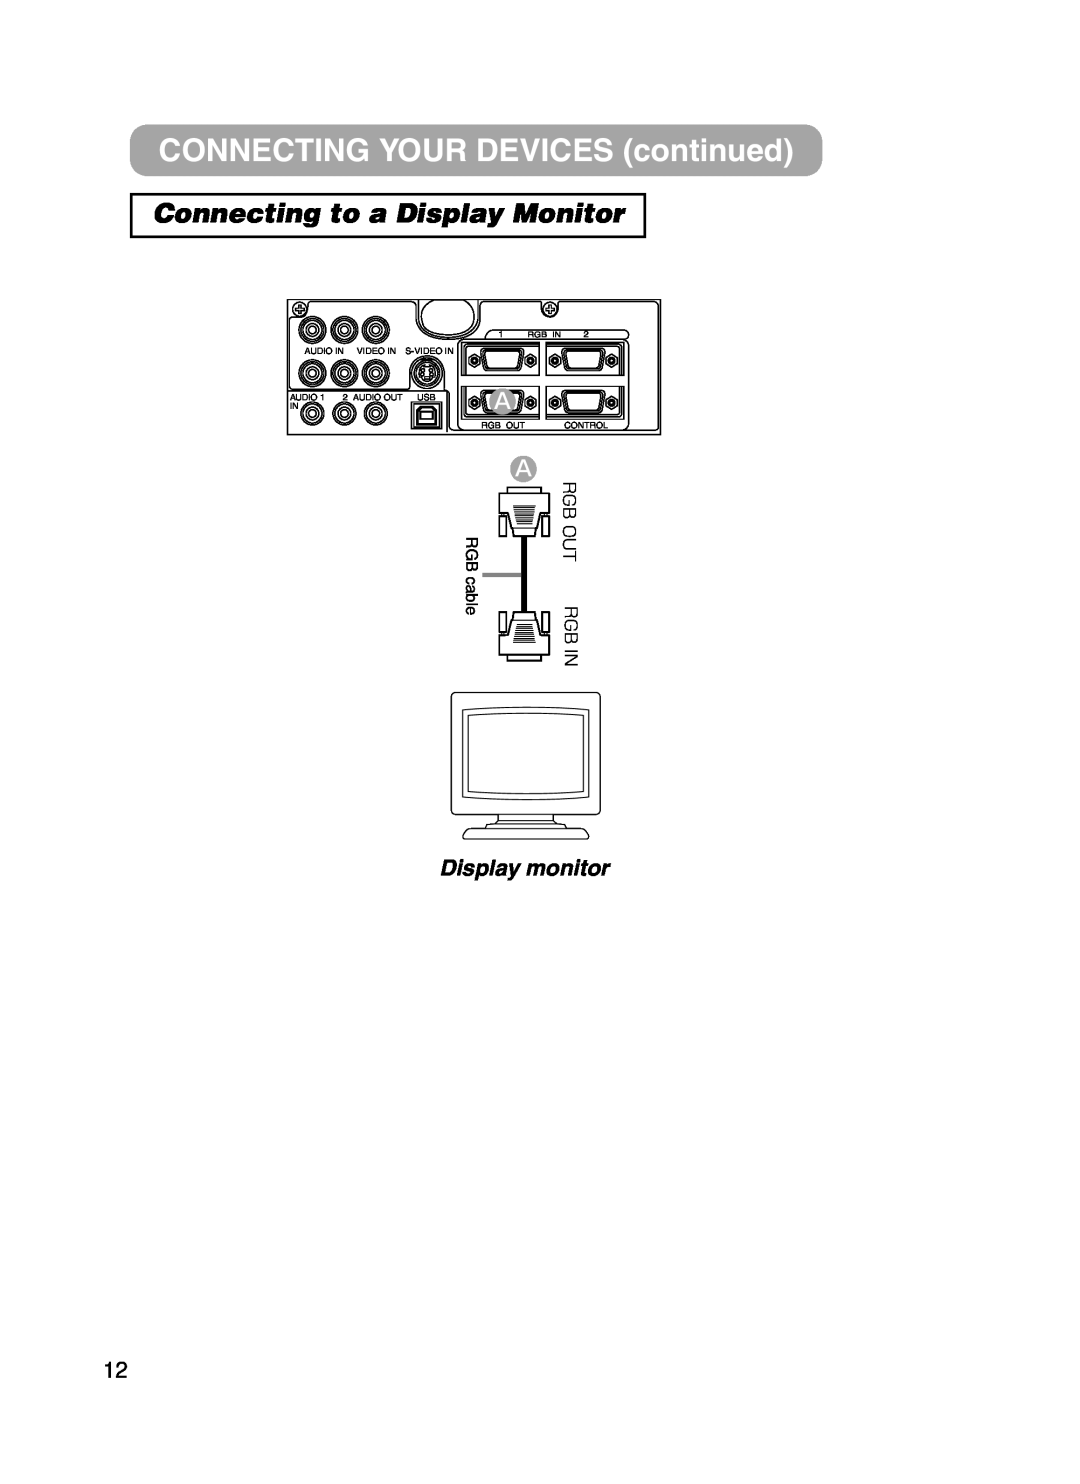 Hitachi CPX385W user manual Connecting to a Display Monitor, Display monitor, CONNECTING YOUR DEVICES continued, RGB cable 